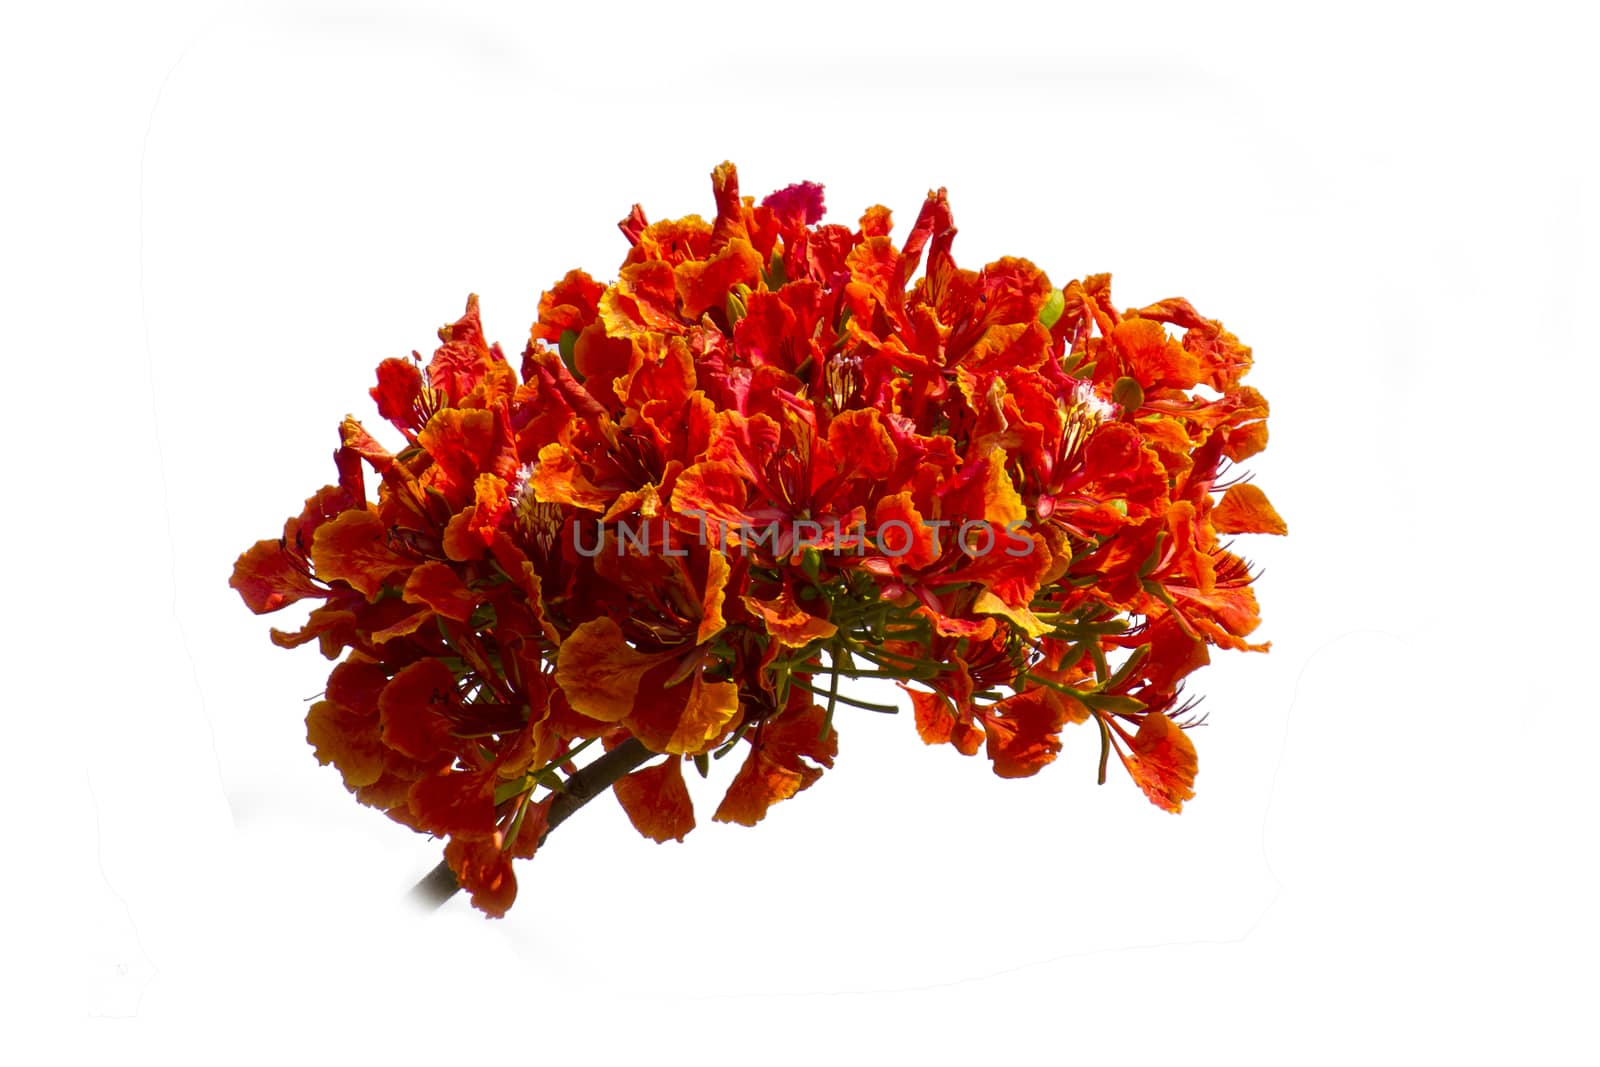 Peacock flowers on poinciana tree. Isolated on white by ibahoh